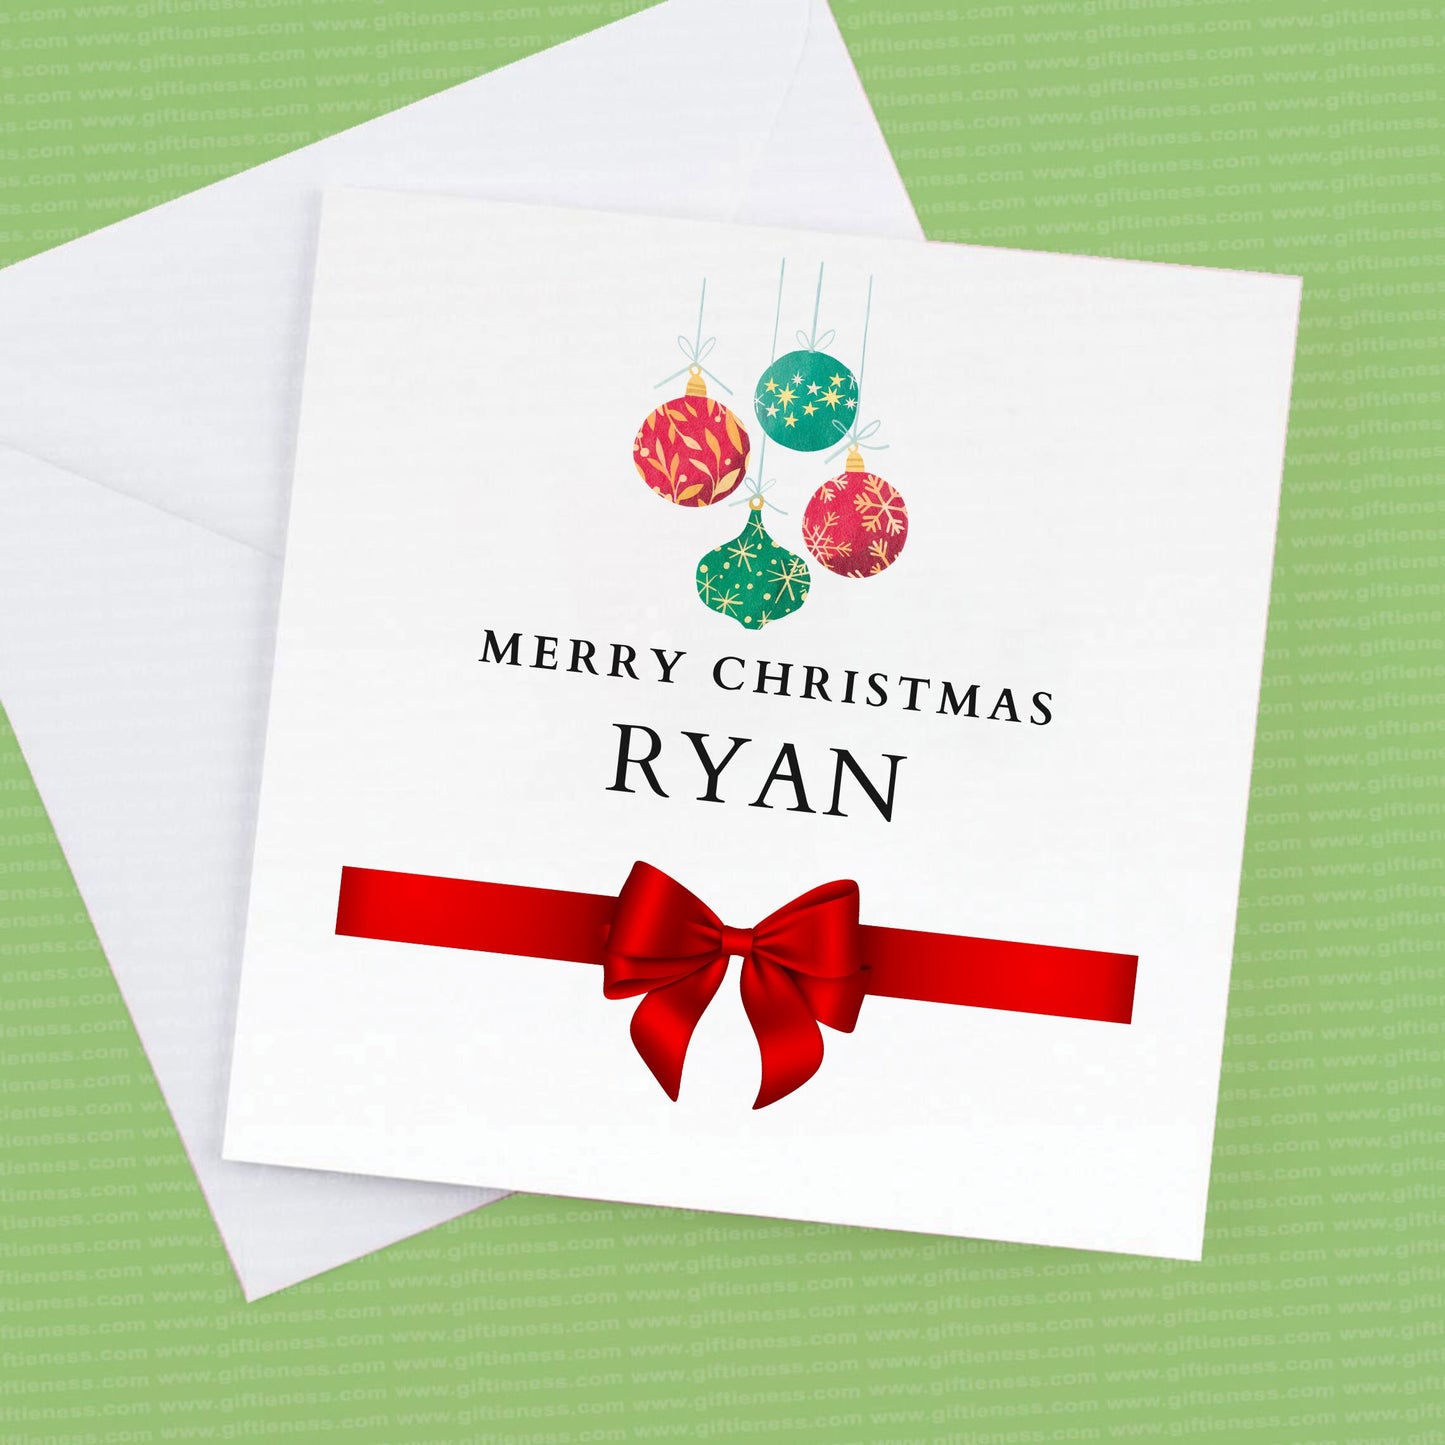 Merry Christmas Personalised name card, Christmas card personalised